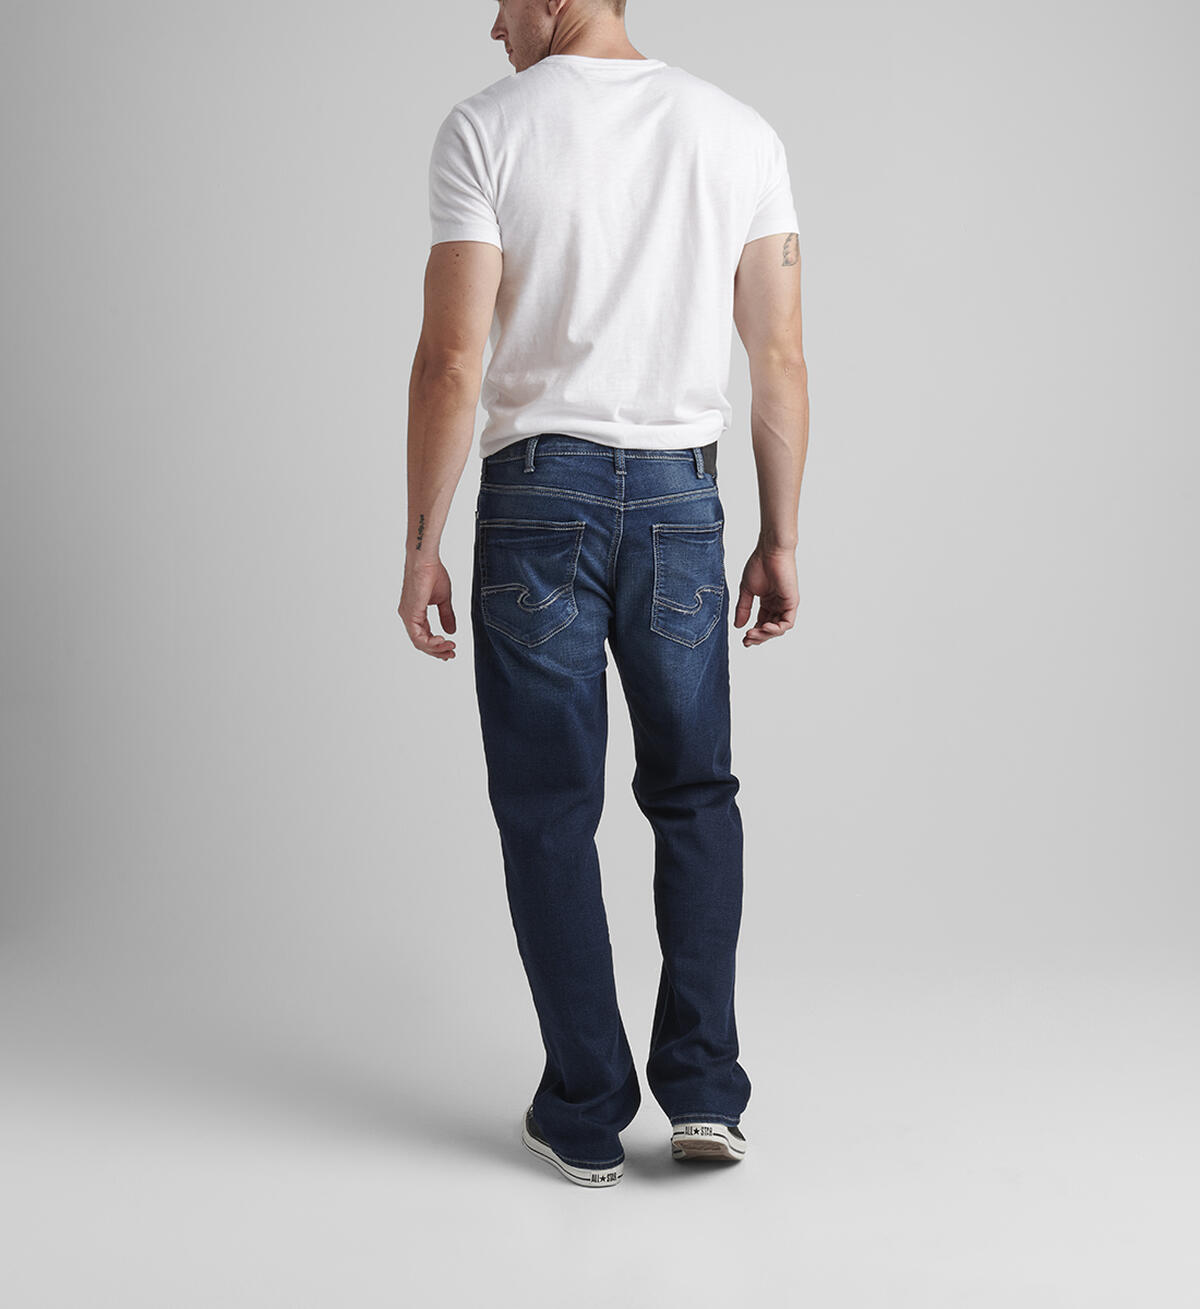 Grayson Easy Fit Straight Leg Jeans, , hi-res image number 1